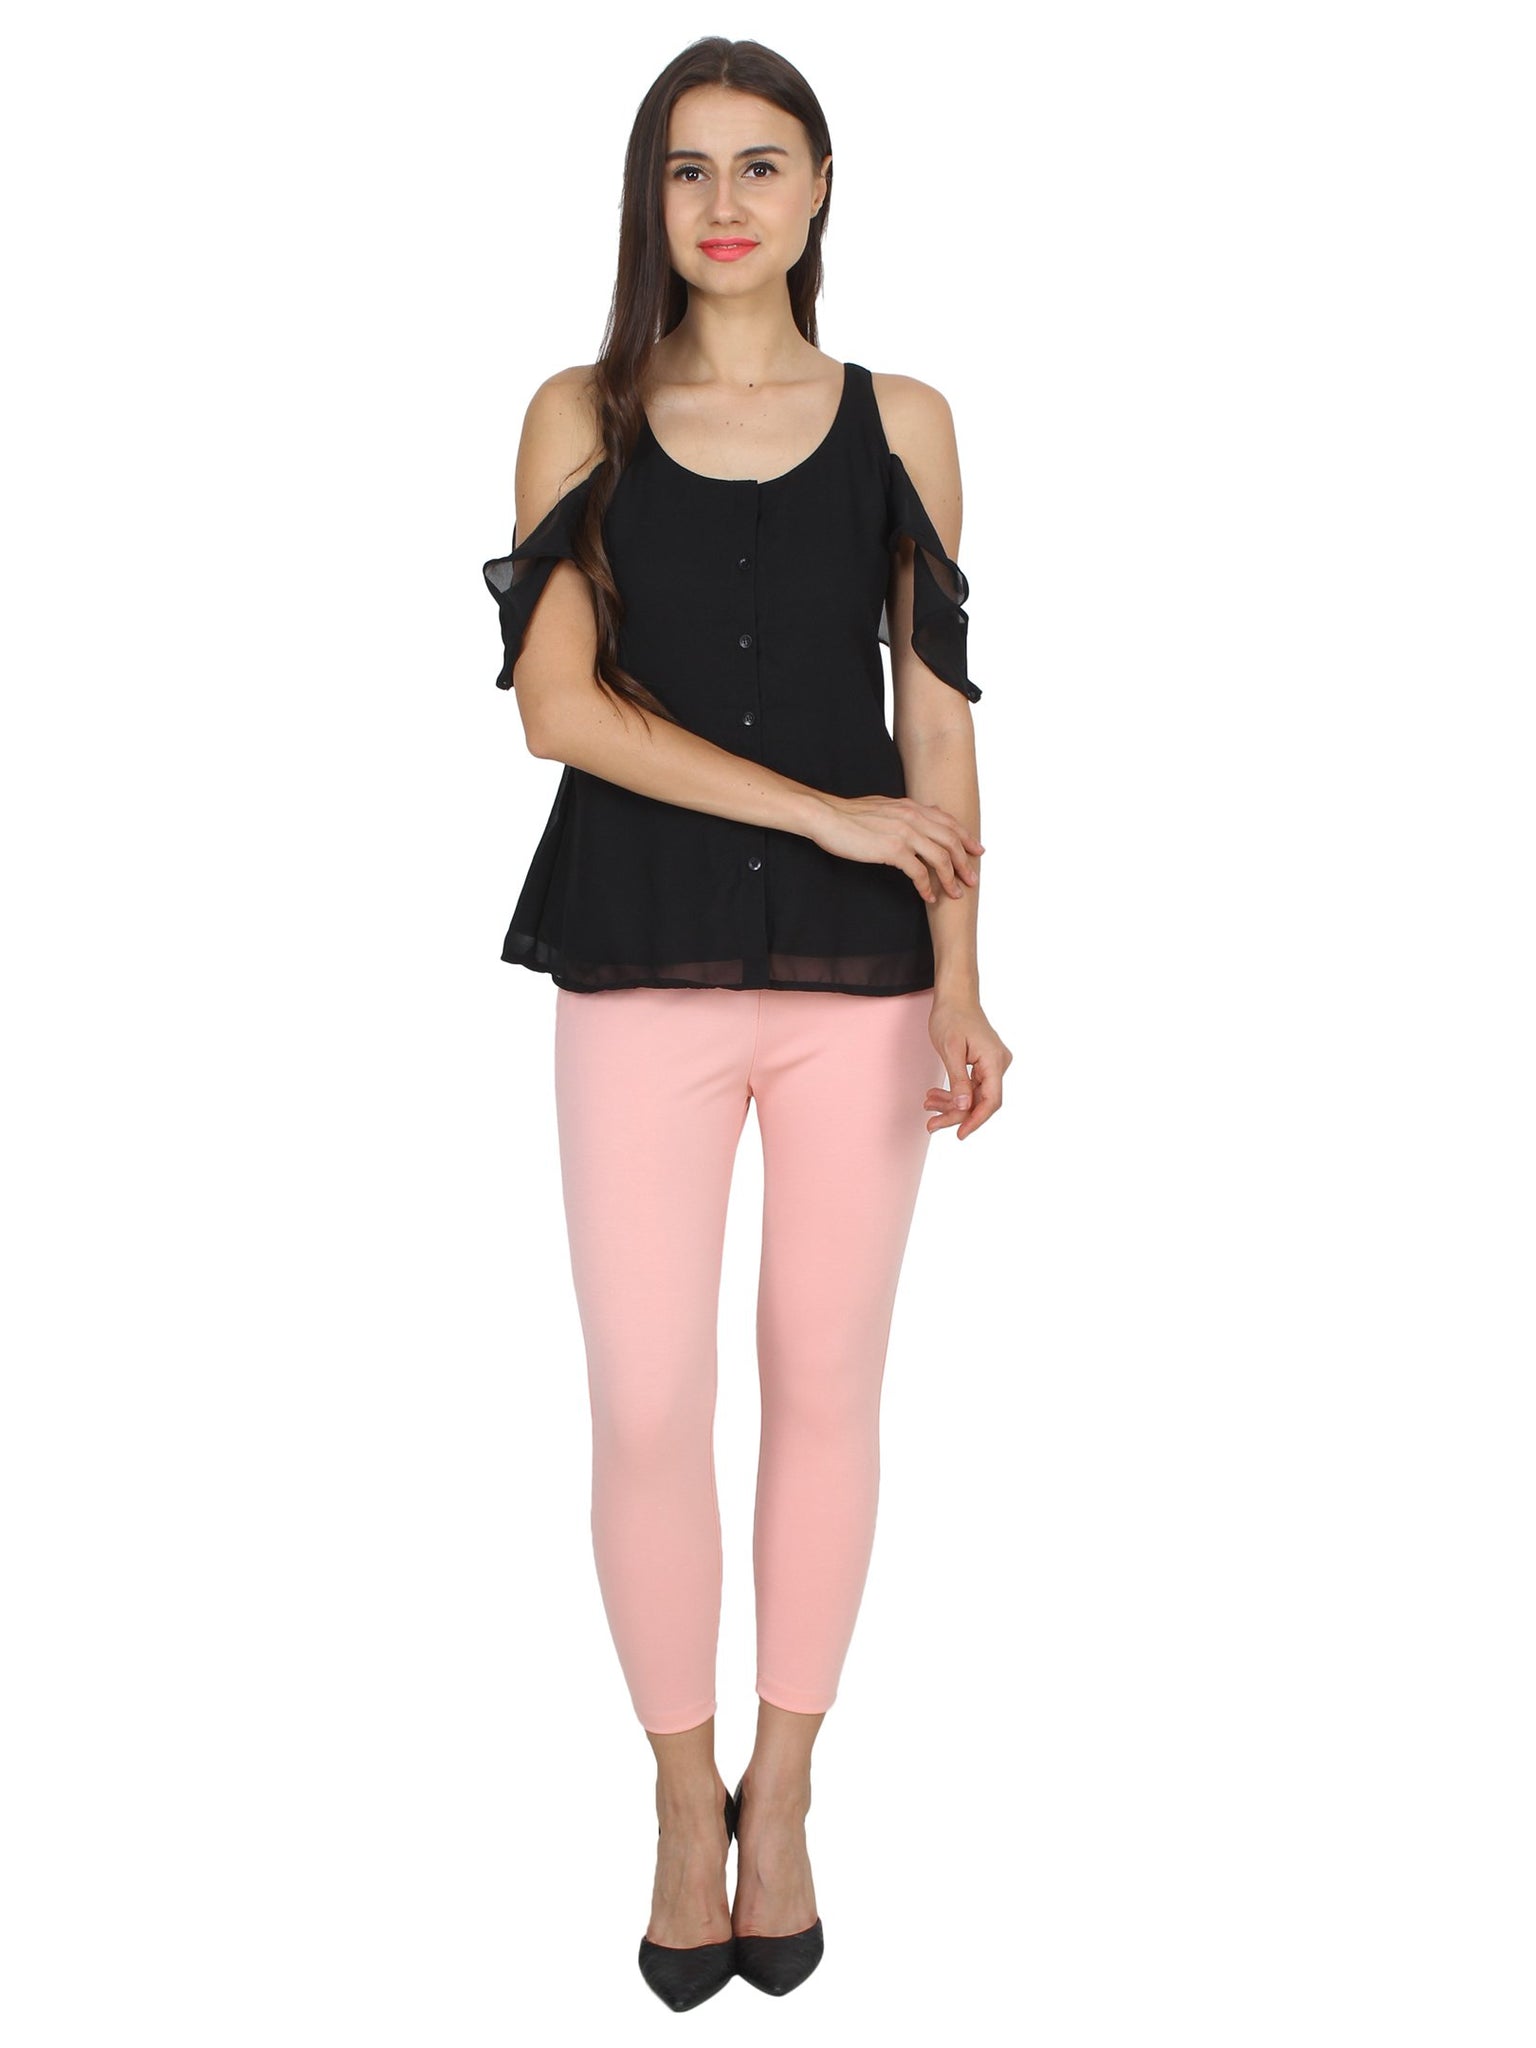 Pink Solid Jeggings